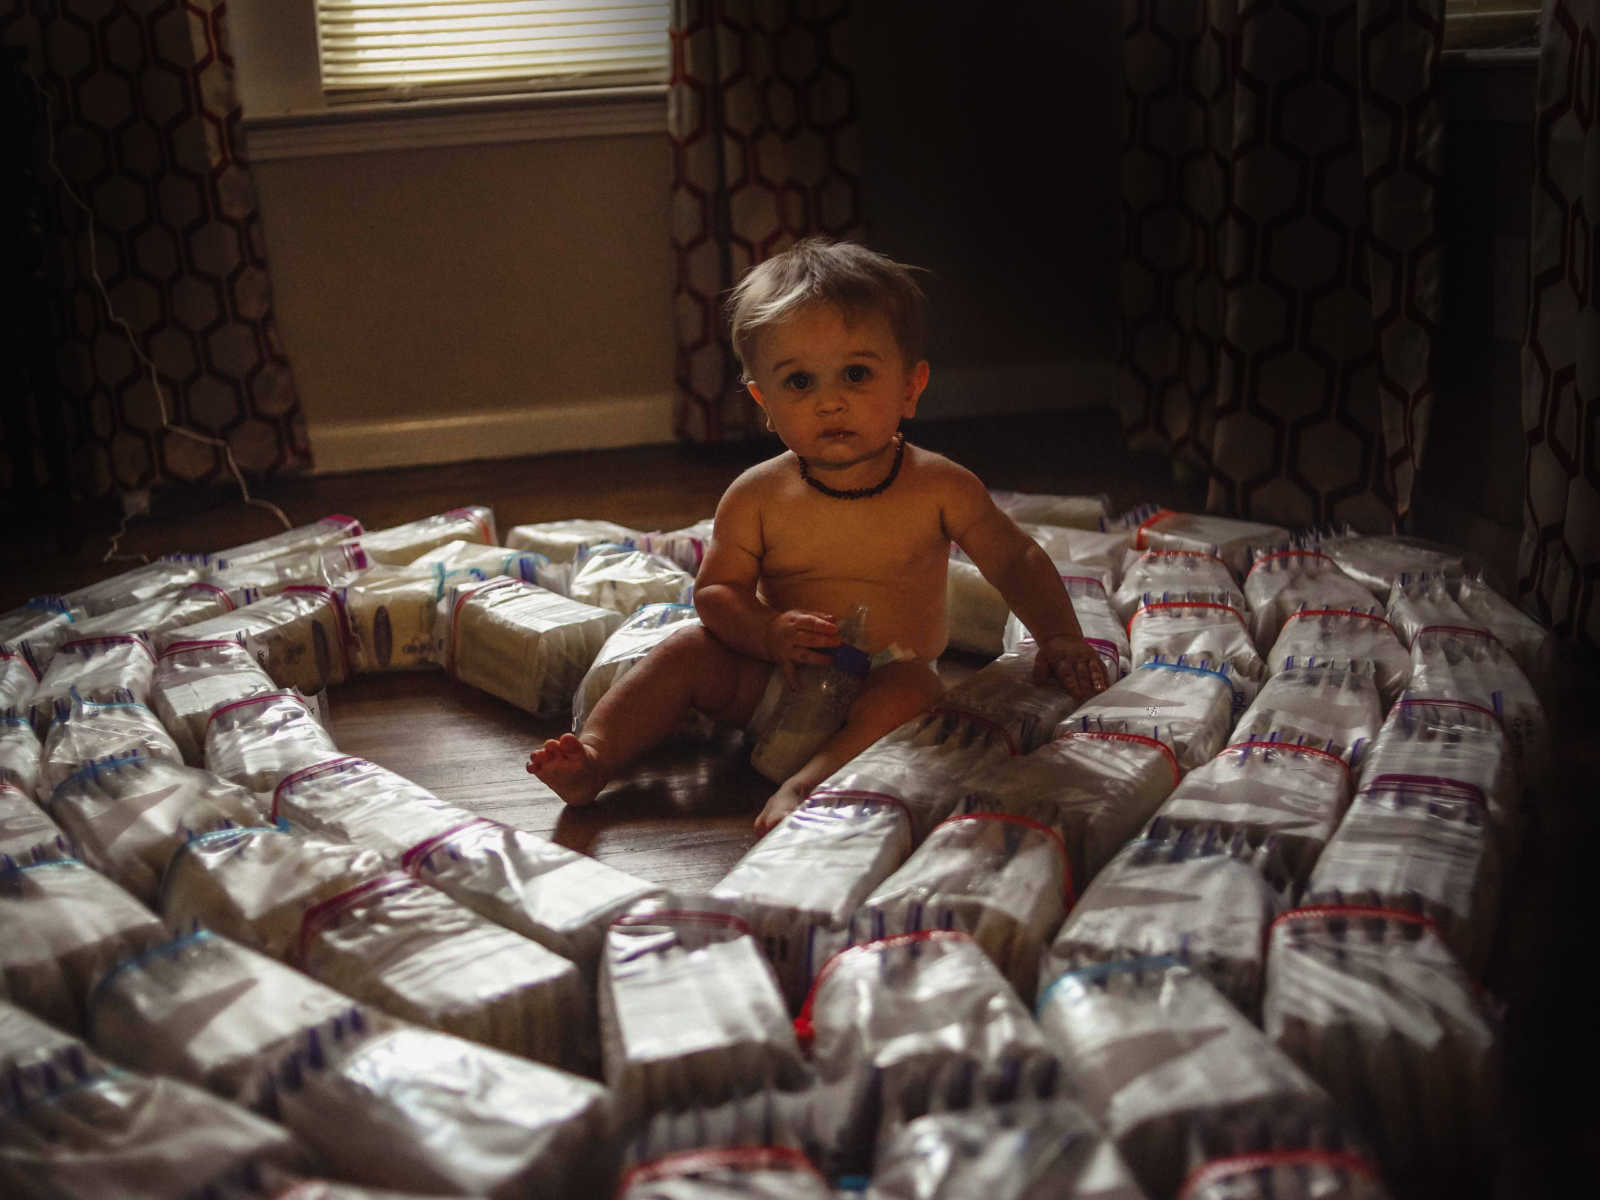 Infant sitting up on the floor with bottle full of breastmilk in the middle of diapers shaped in heart